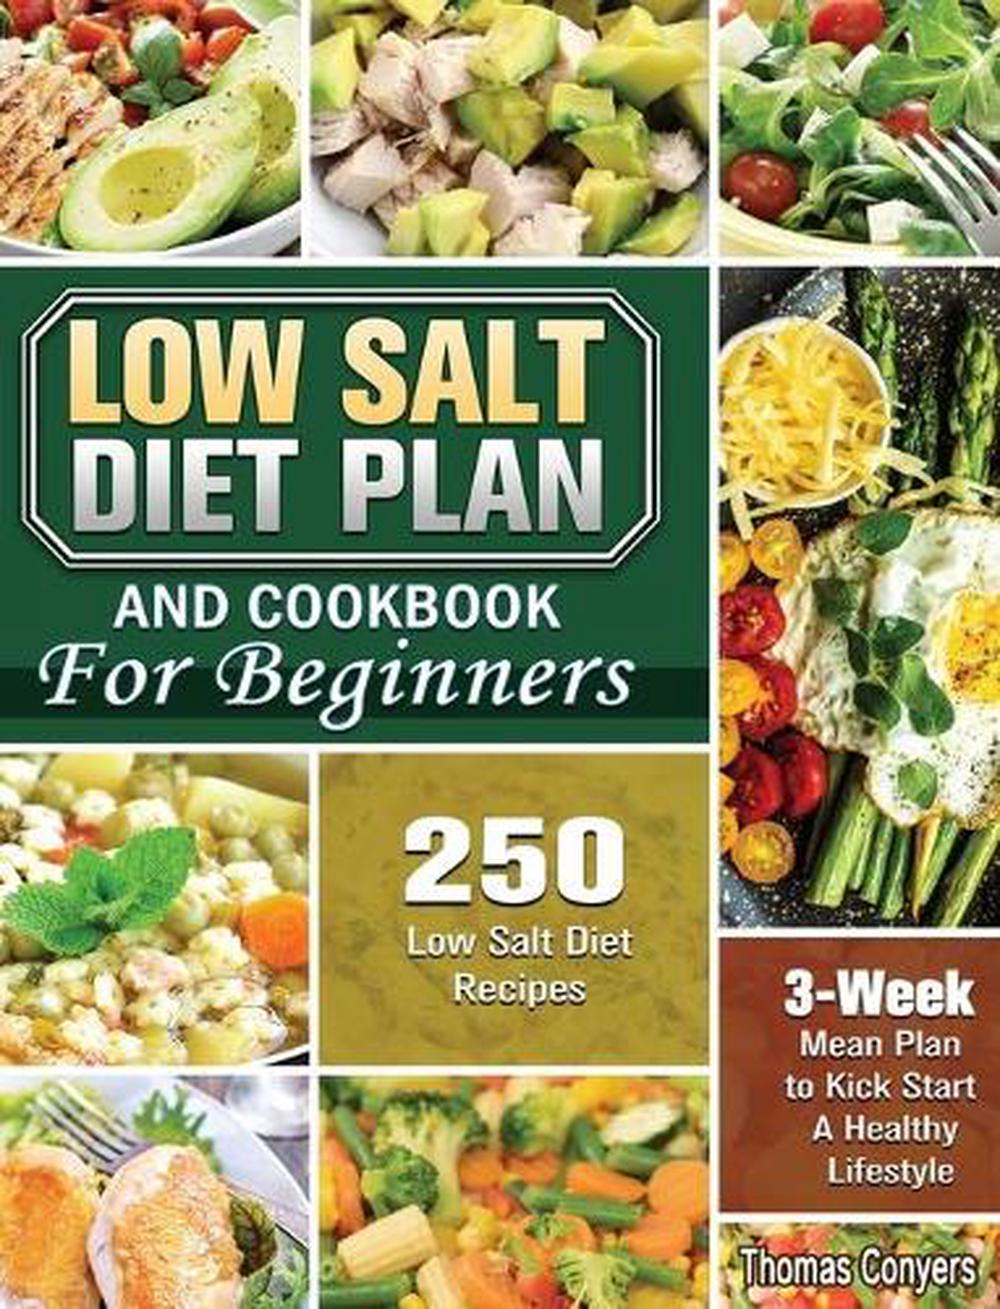 Low Salt Diet Plan and Cookbook for Beginners by Thomas Conyers